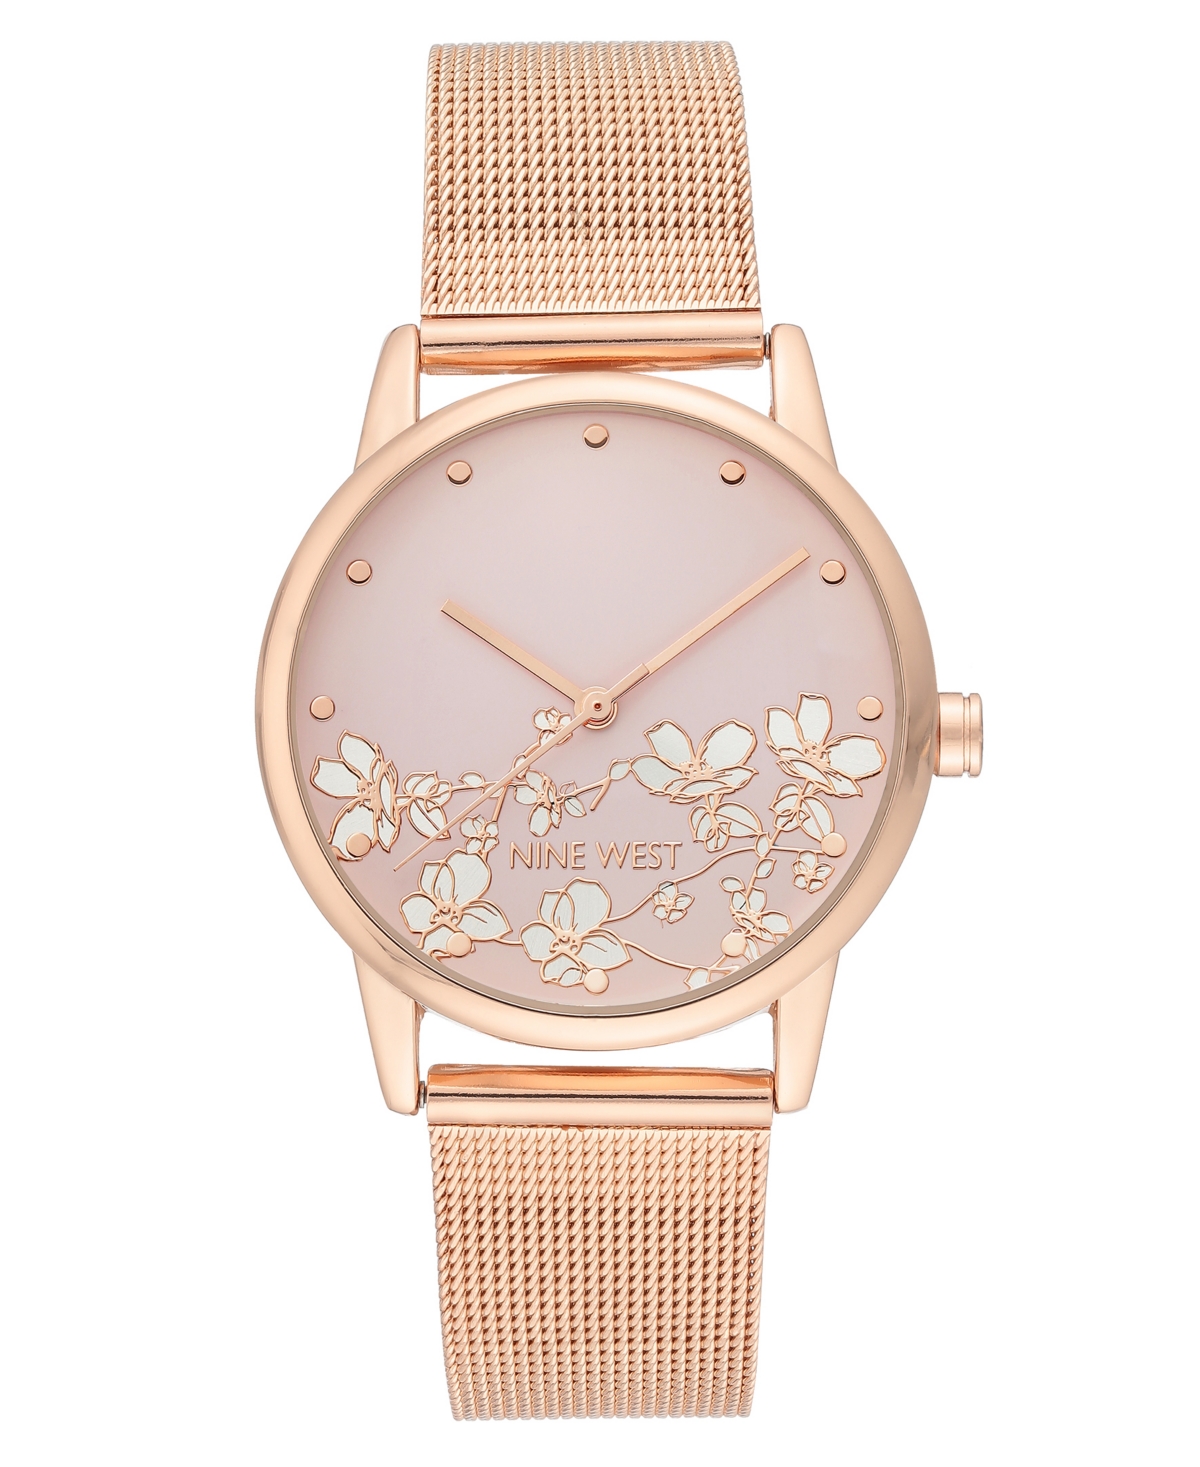 Nine West Women's Quartz Rose Gold-tone Stainless Steel Mesh Band And Flower Pattern Watch, 35mm